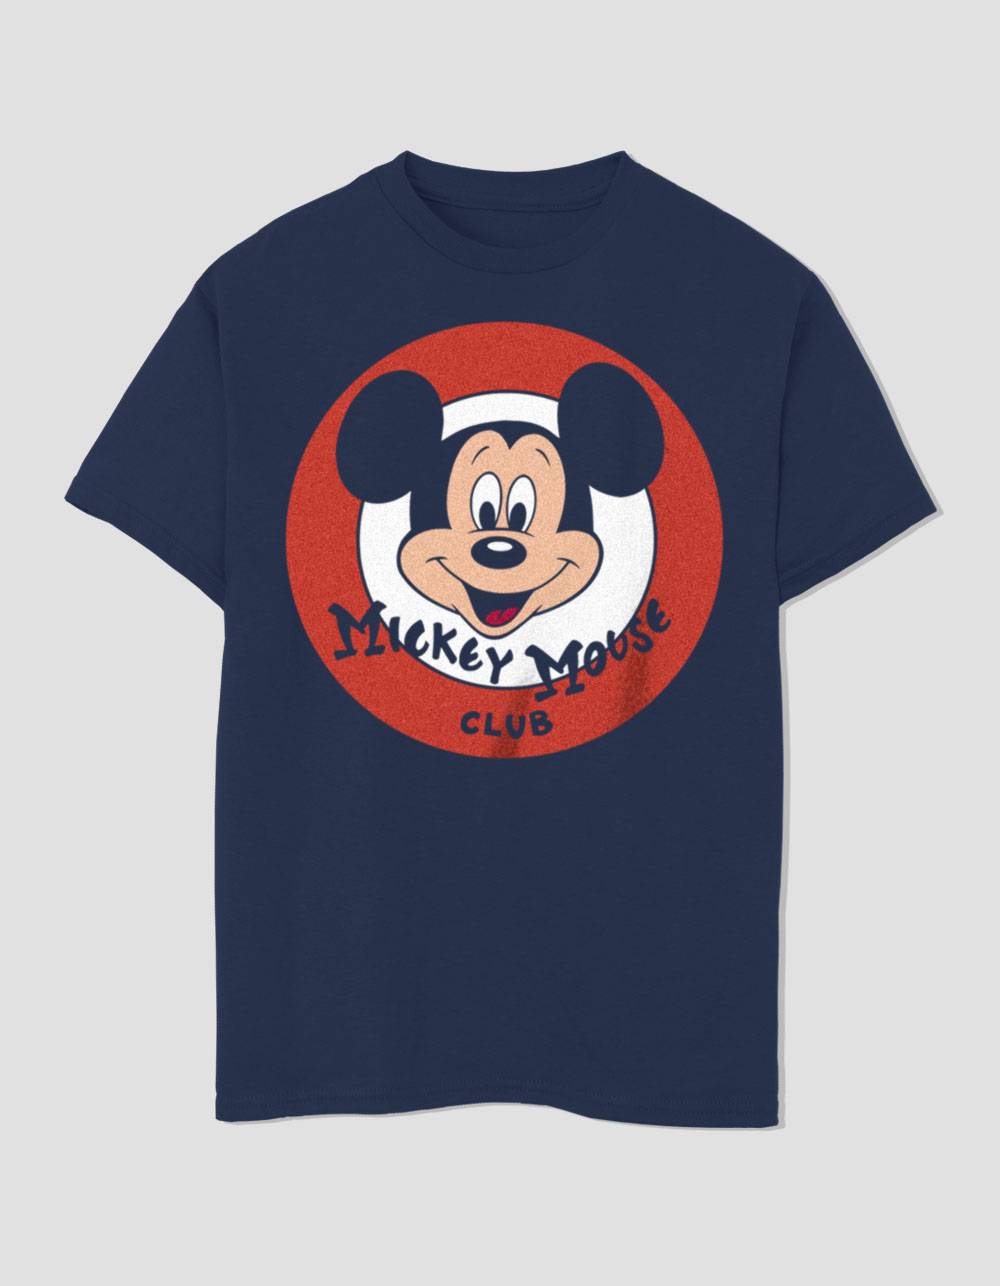 Disney T-Shirt Red Adult Womens Mickey Mouse L